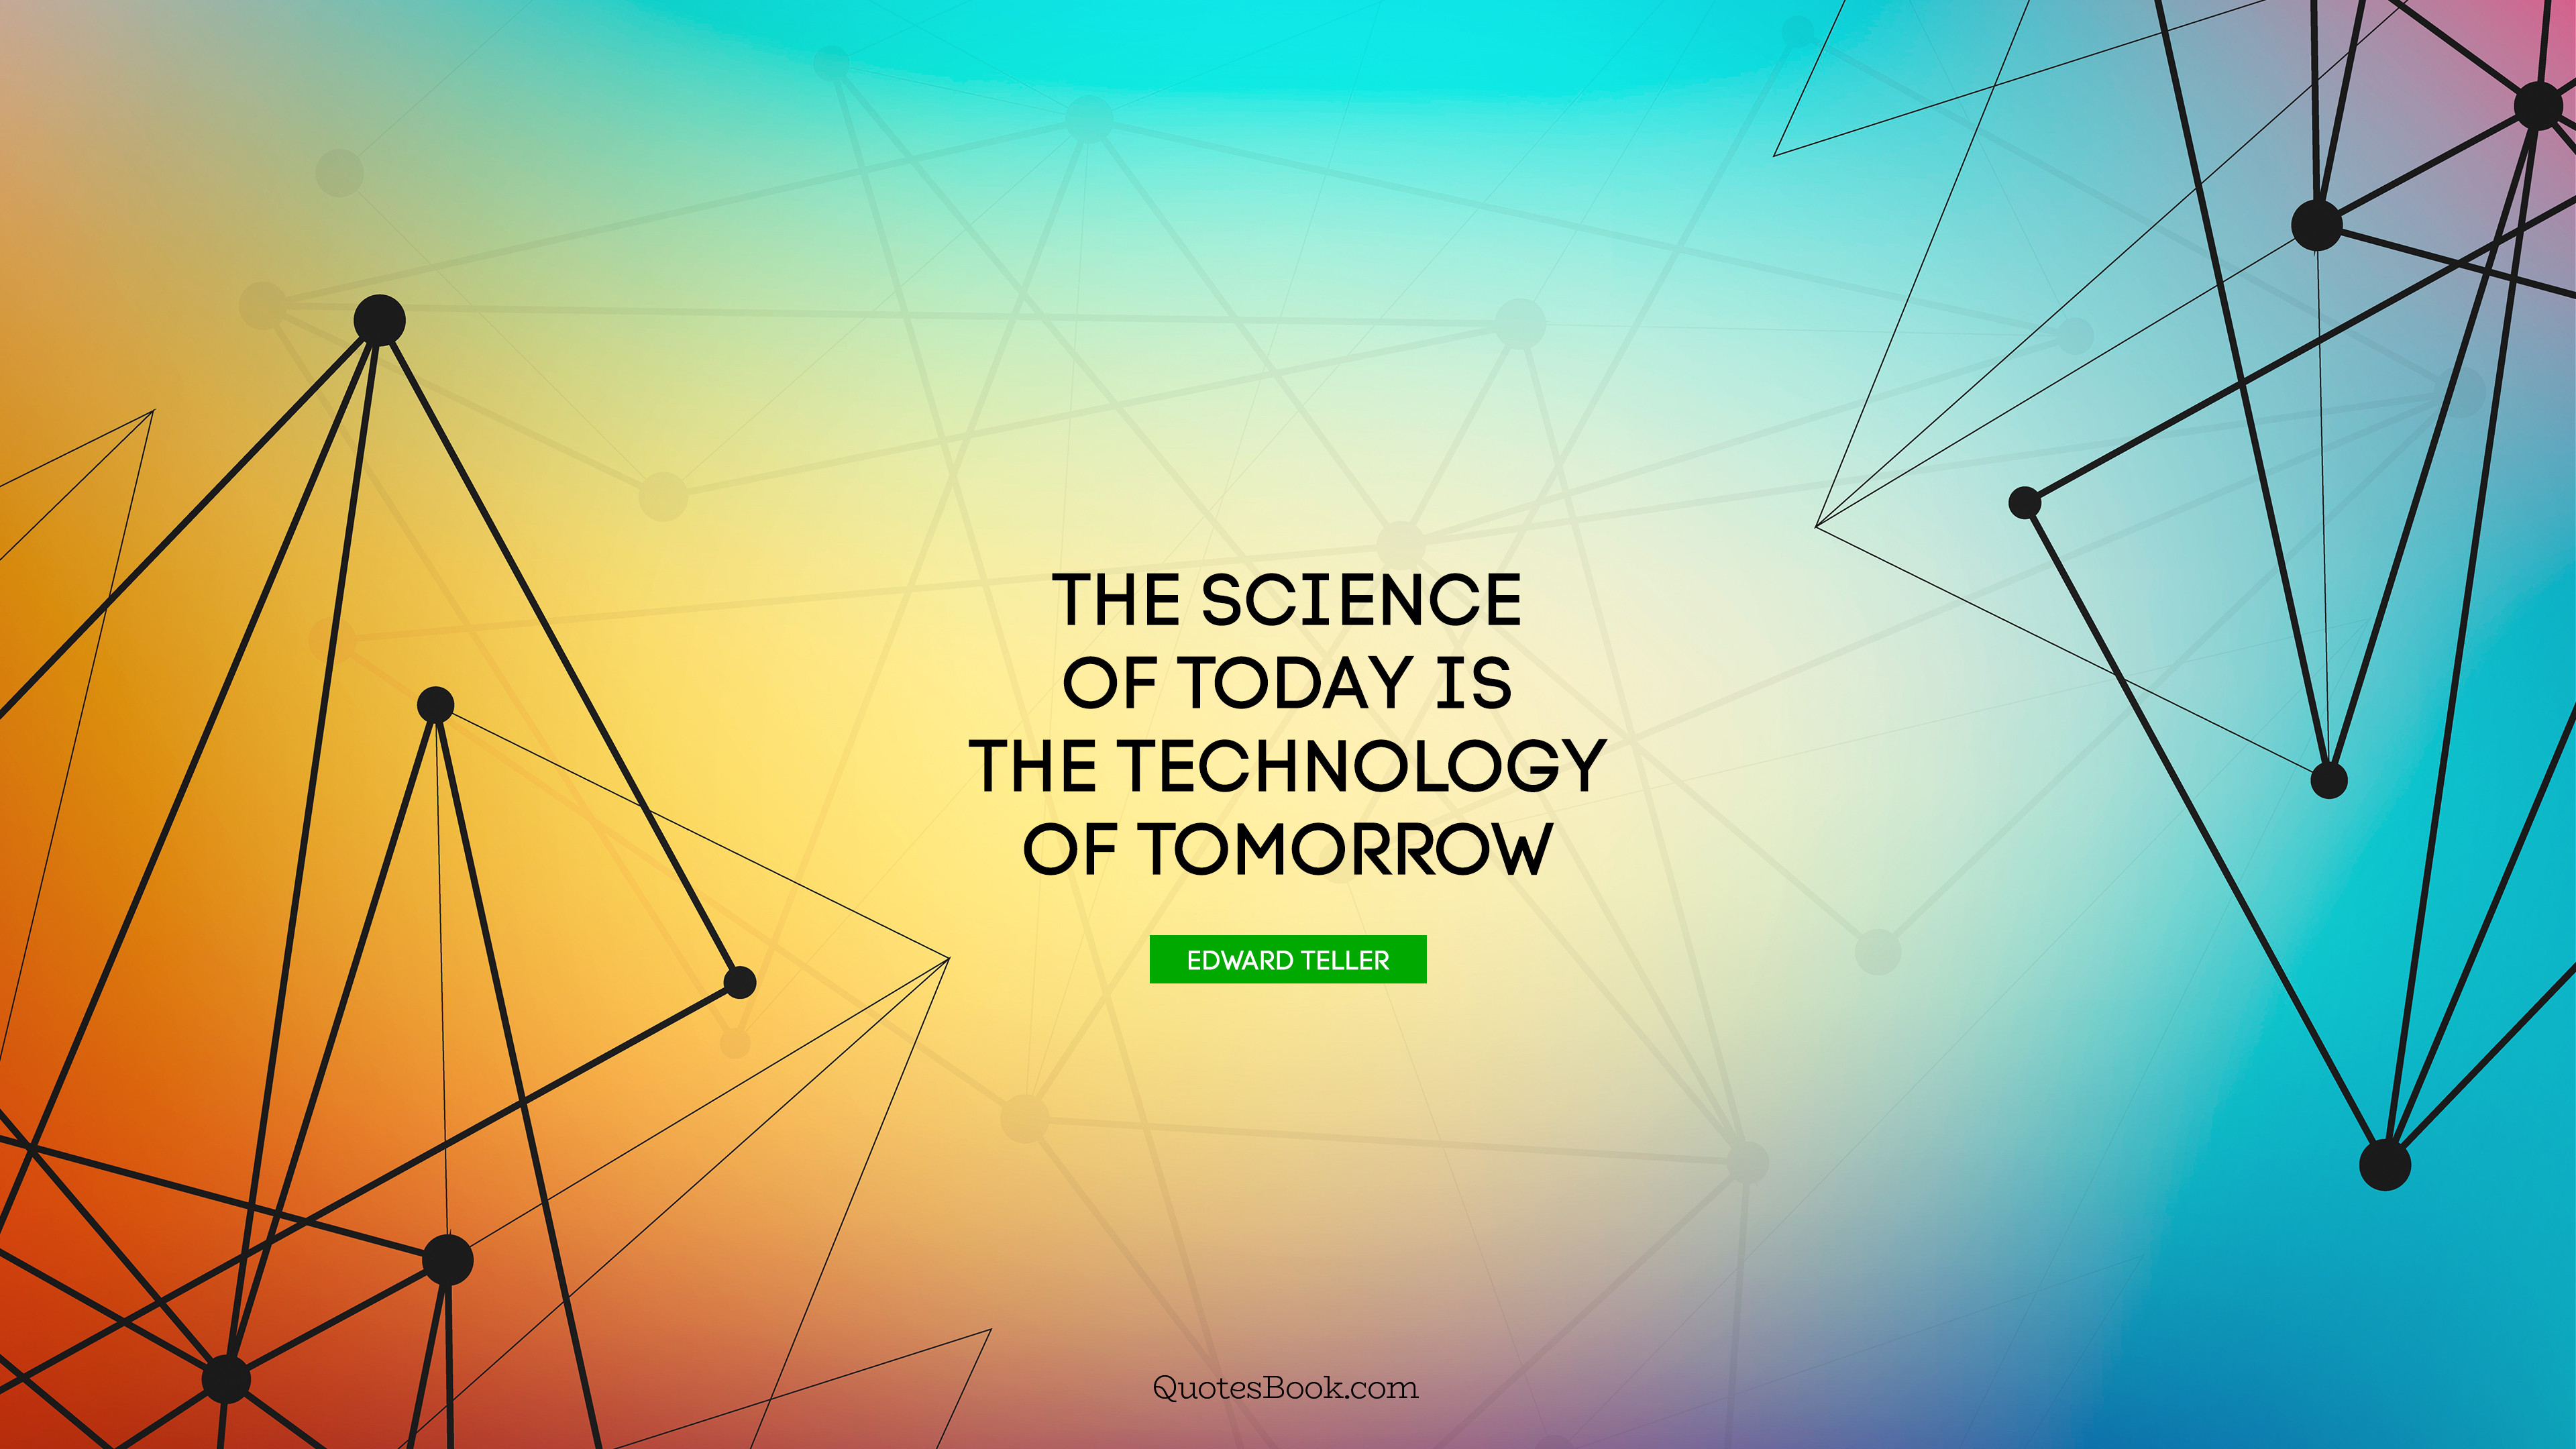 The science of today is the technology of tomorrow. - Quote by Edward